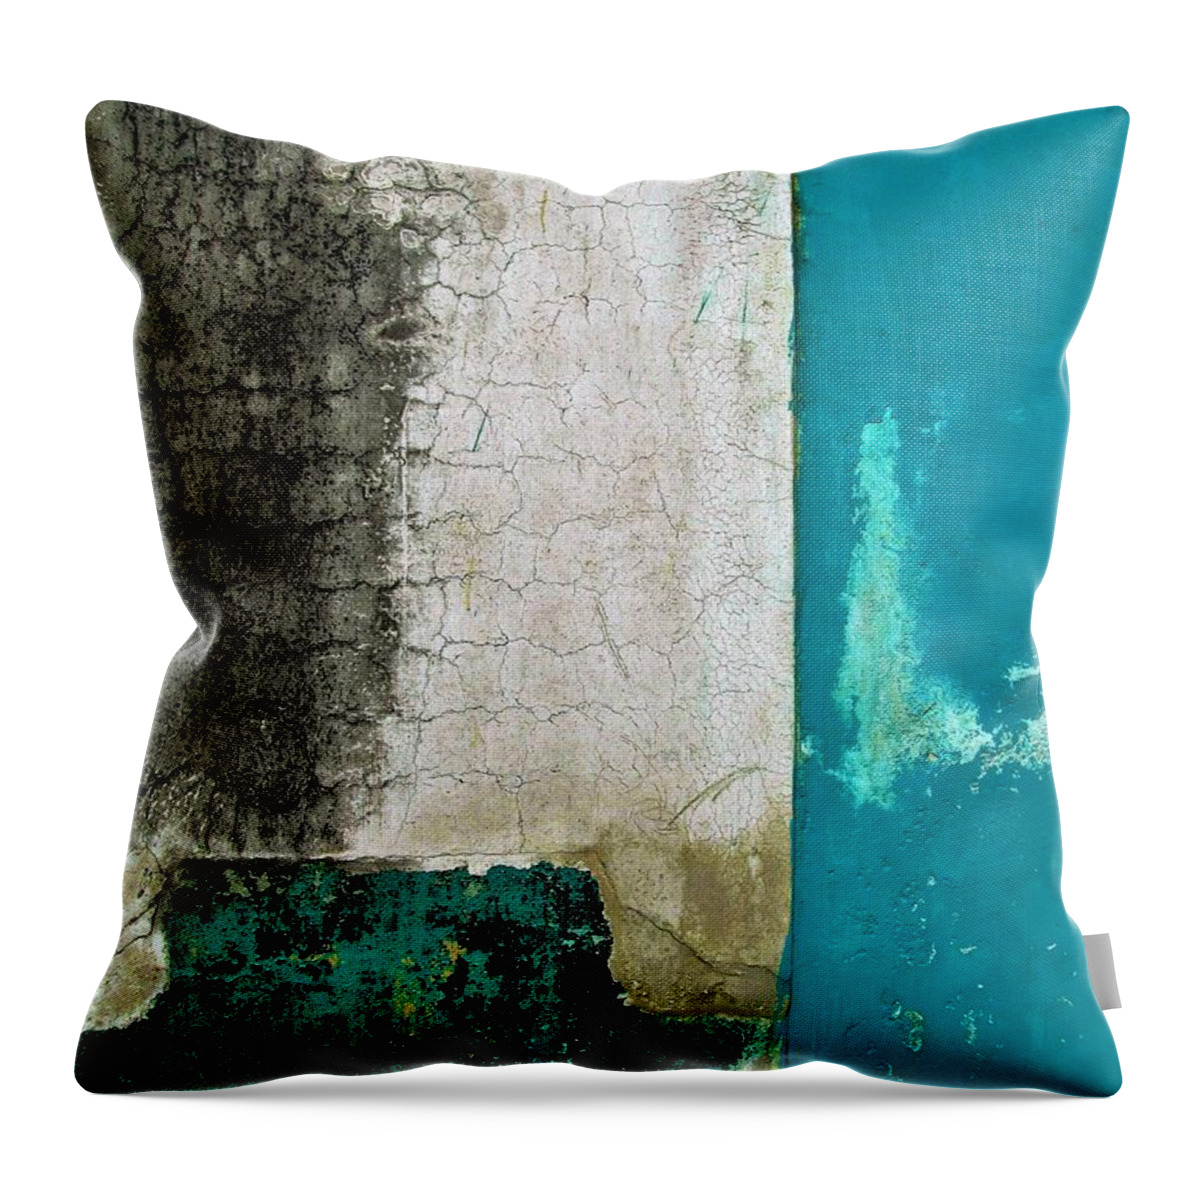 Texture Throw Pillow featuring the photograph Wall Abstract 296 by Maria Huntley